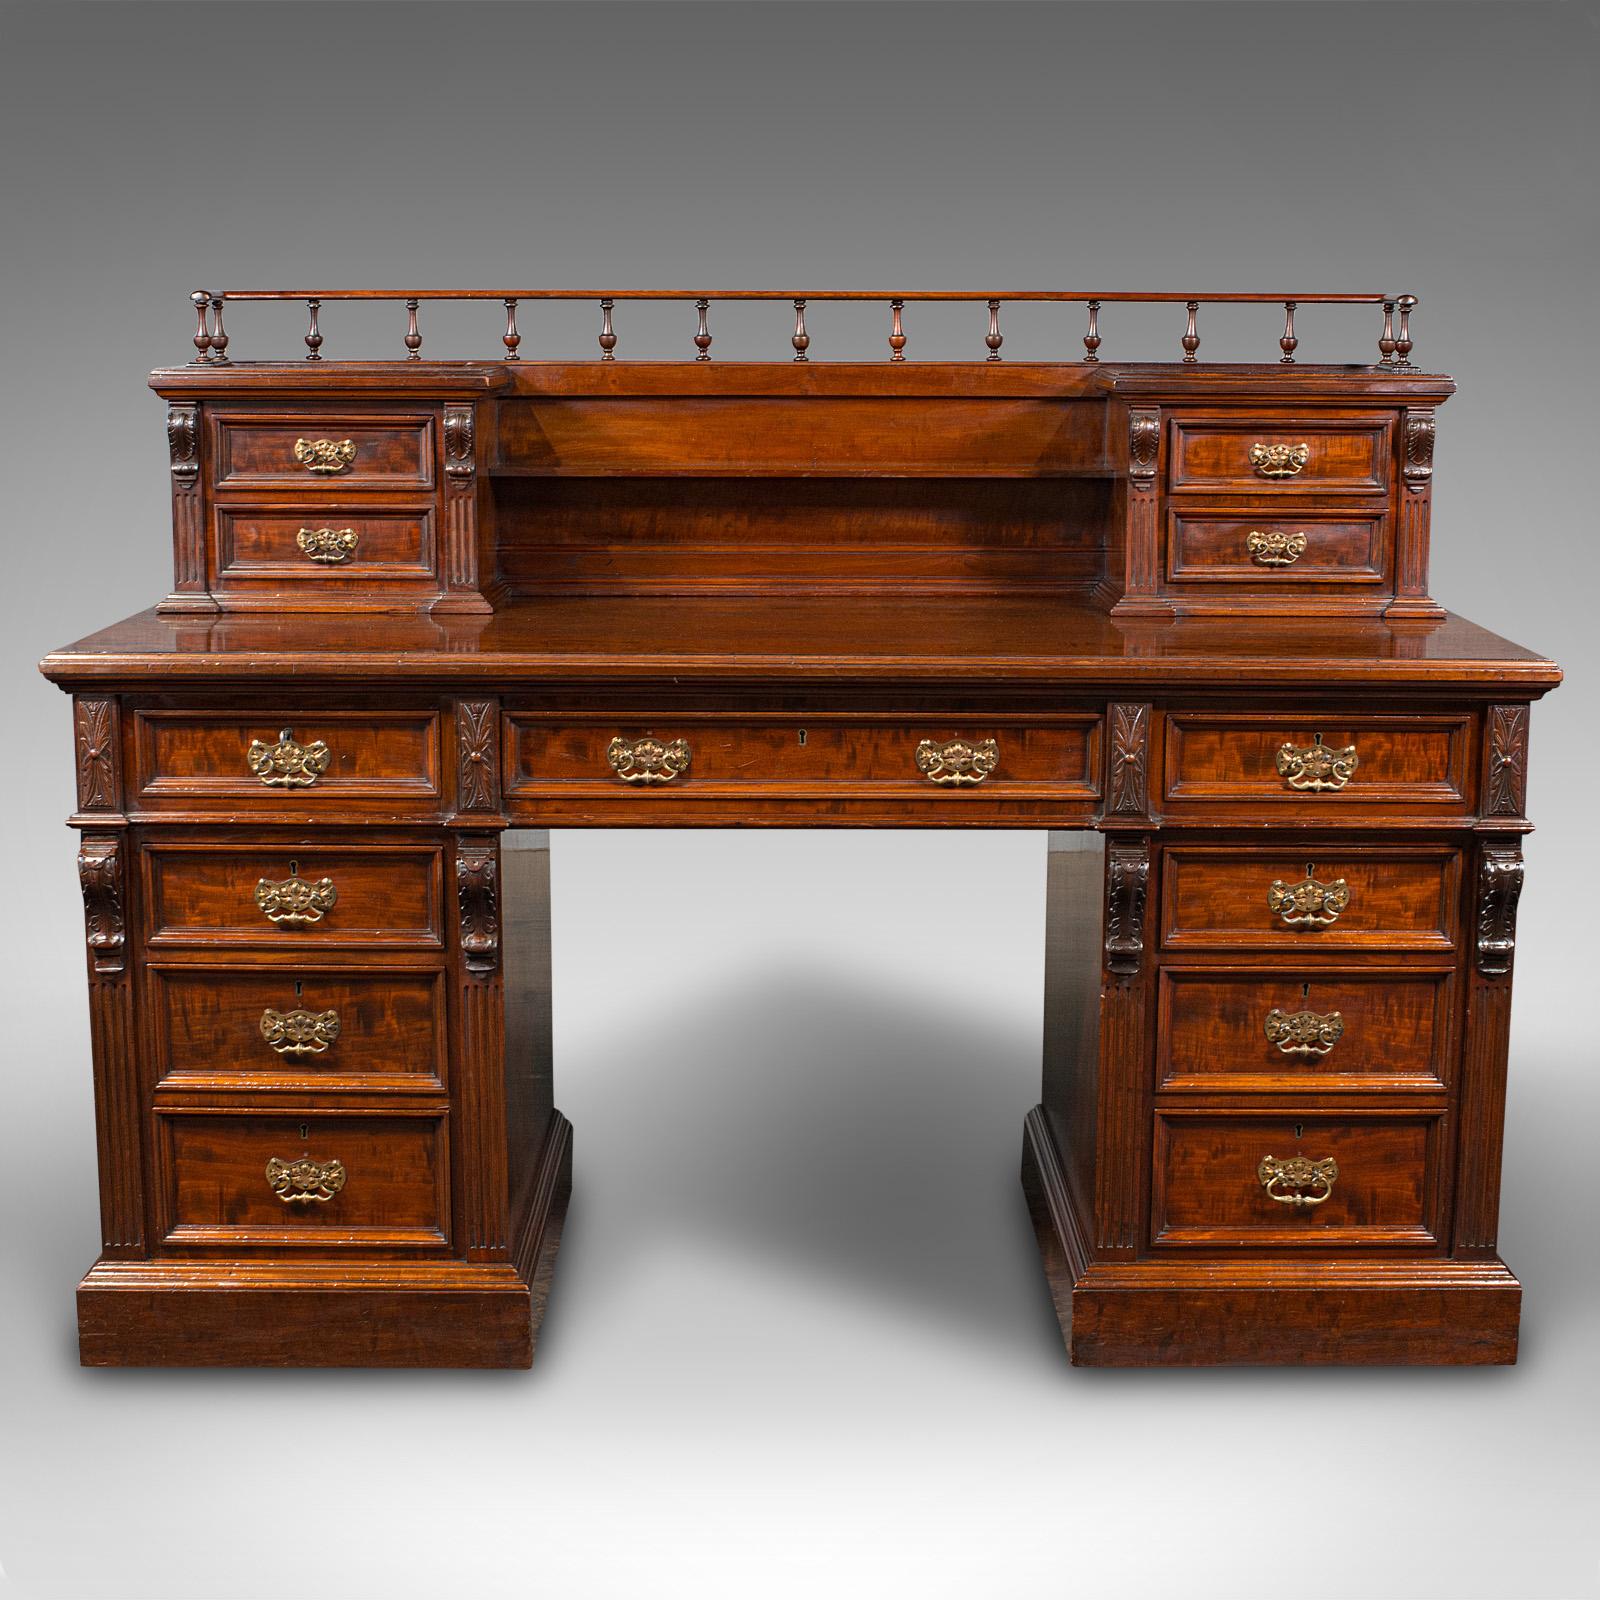 This is a grand antique executive desk. An English, satinwood and mahogany 13 drawer office desk, dating to the mid Victorian period, circa 1860.

Exceptional quality and proportion to this superb Victorian desk.
Displays a desirable aged patina